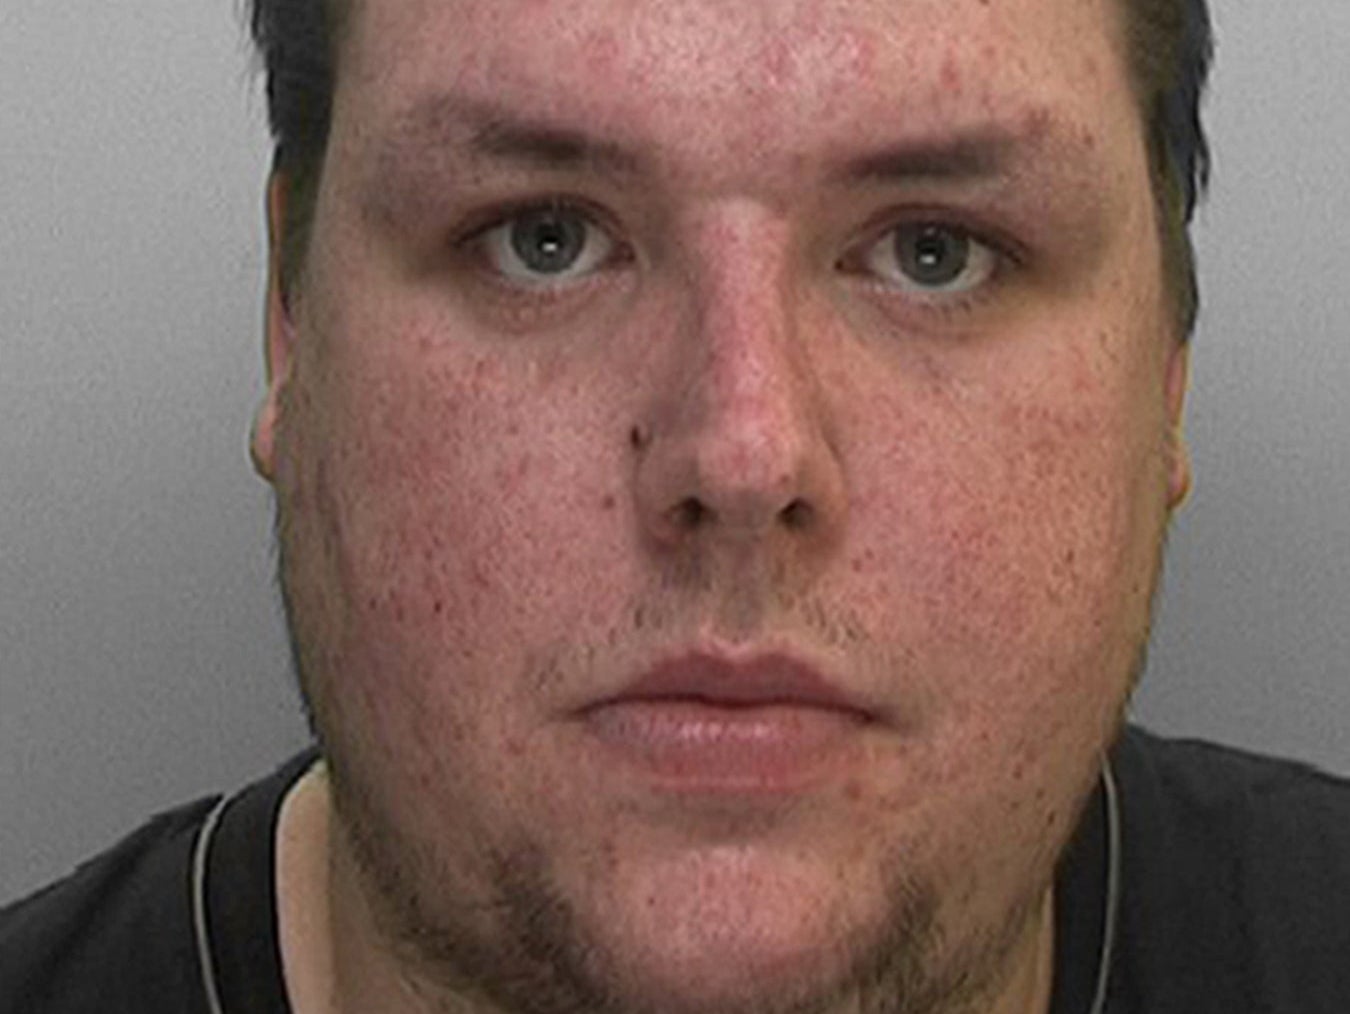 Tobias Powell was jailed for three years for stirring up racial hatred